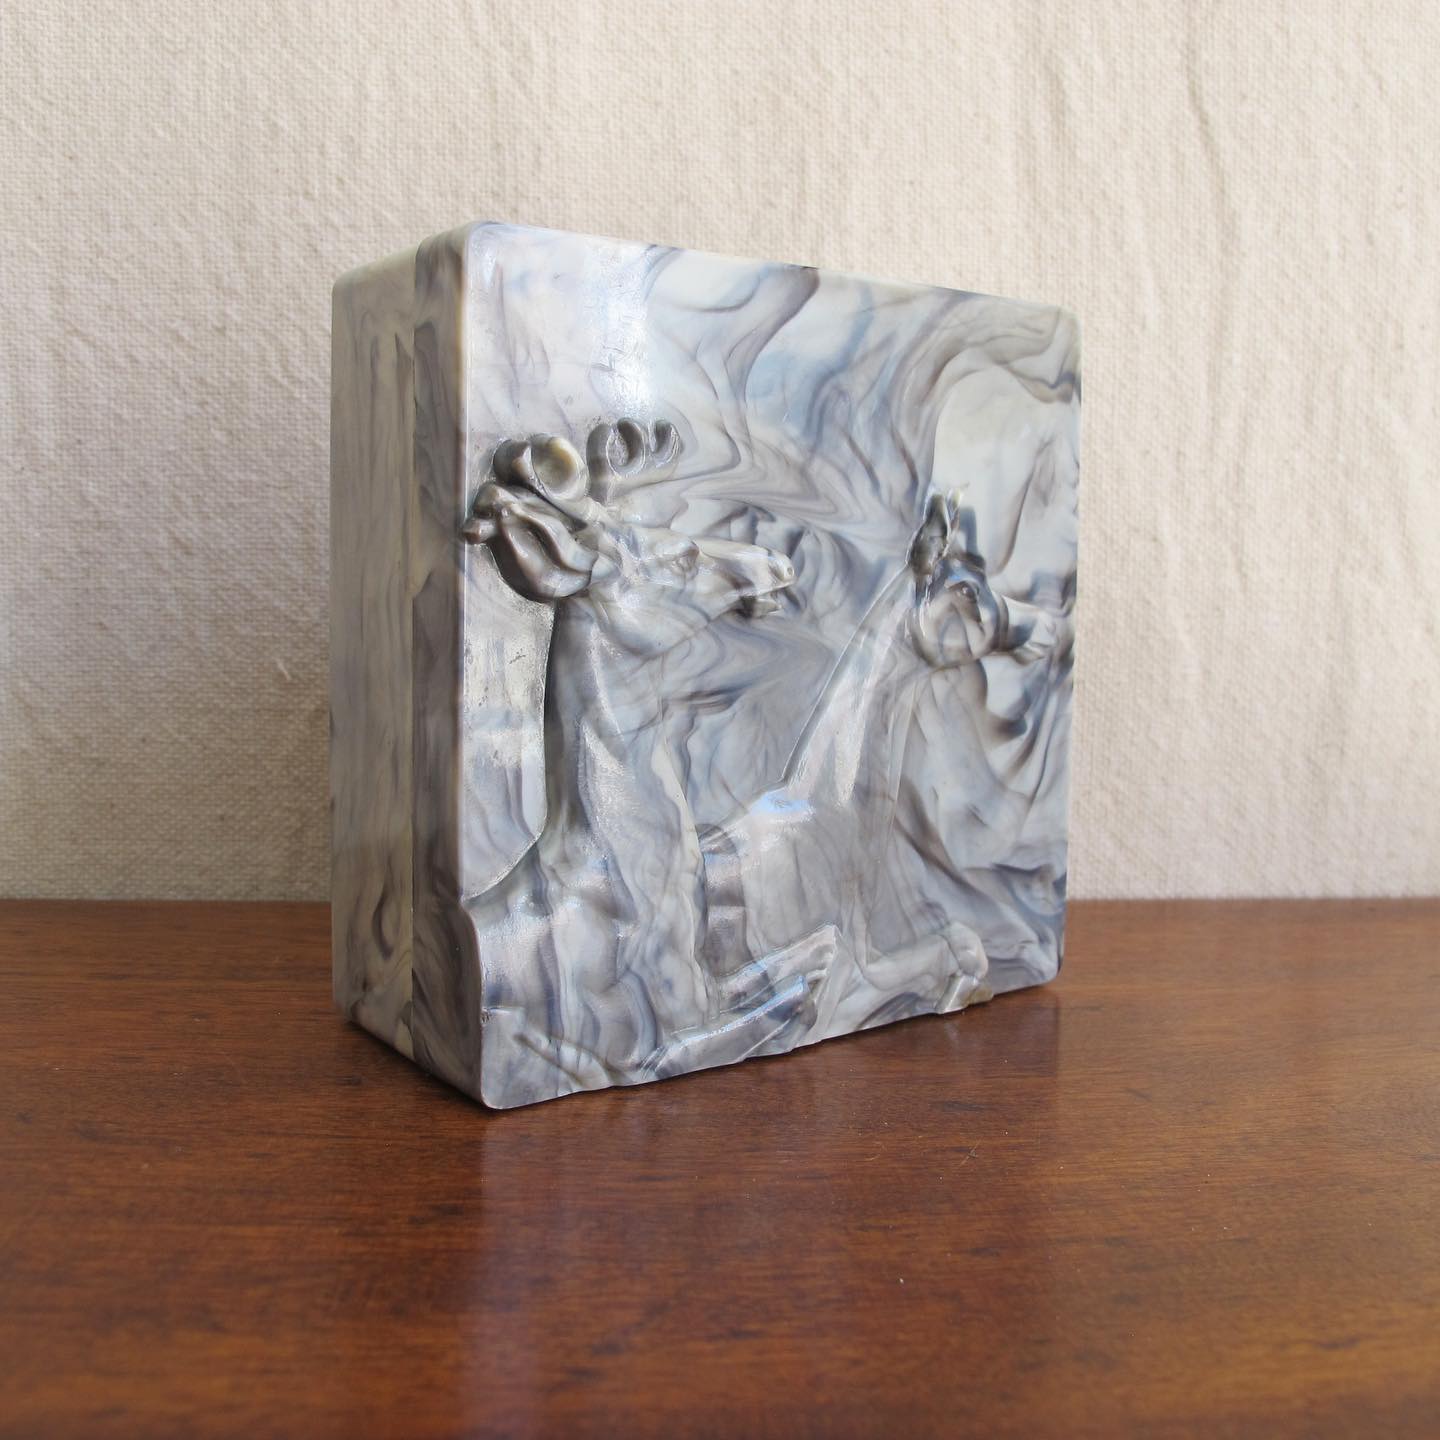 Early marbled celluloid box with relief of deer to the lid by Hickok, c. 1940s